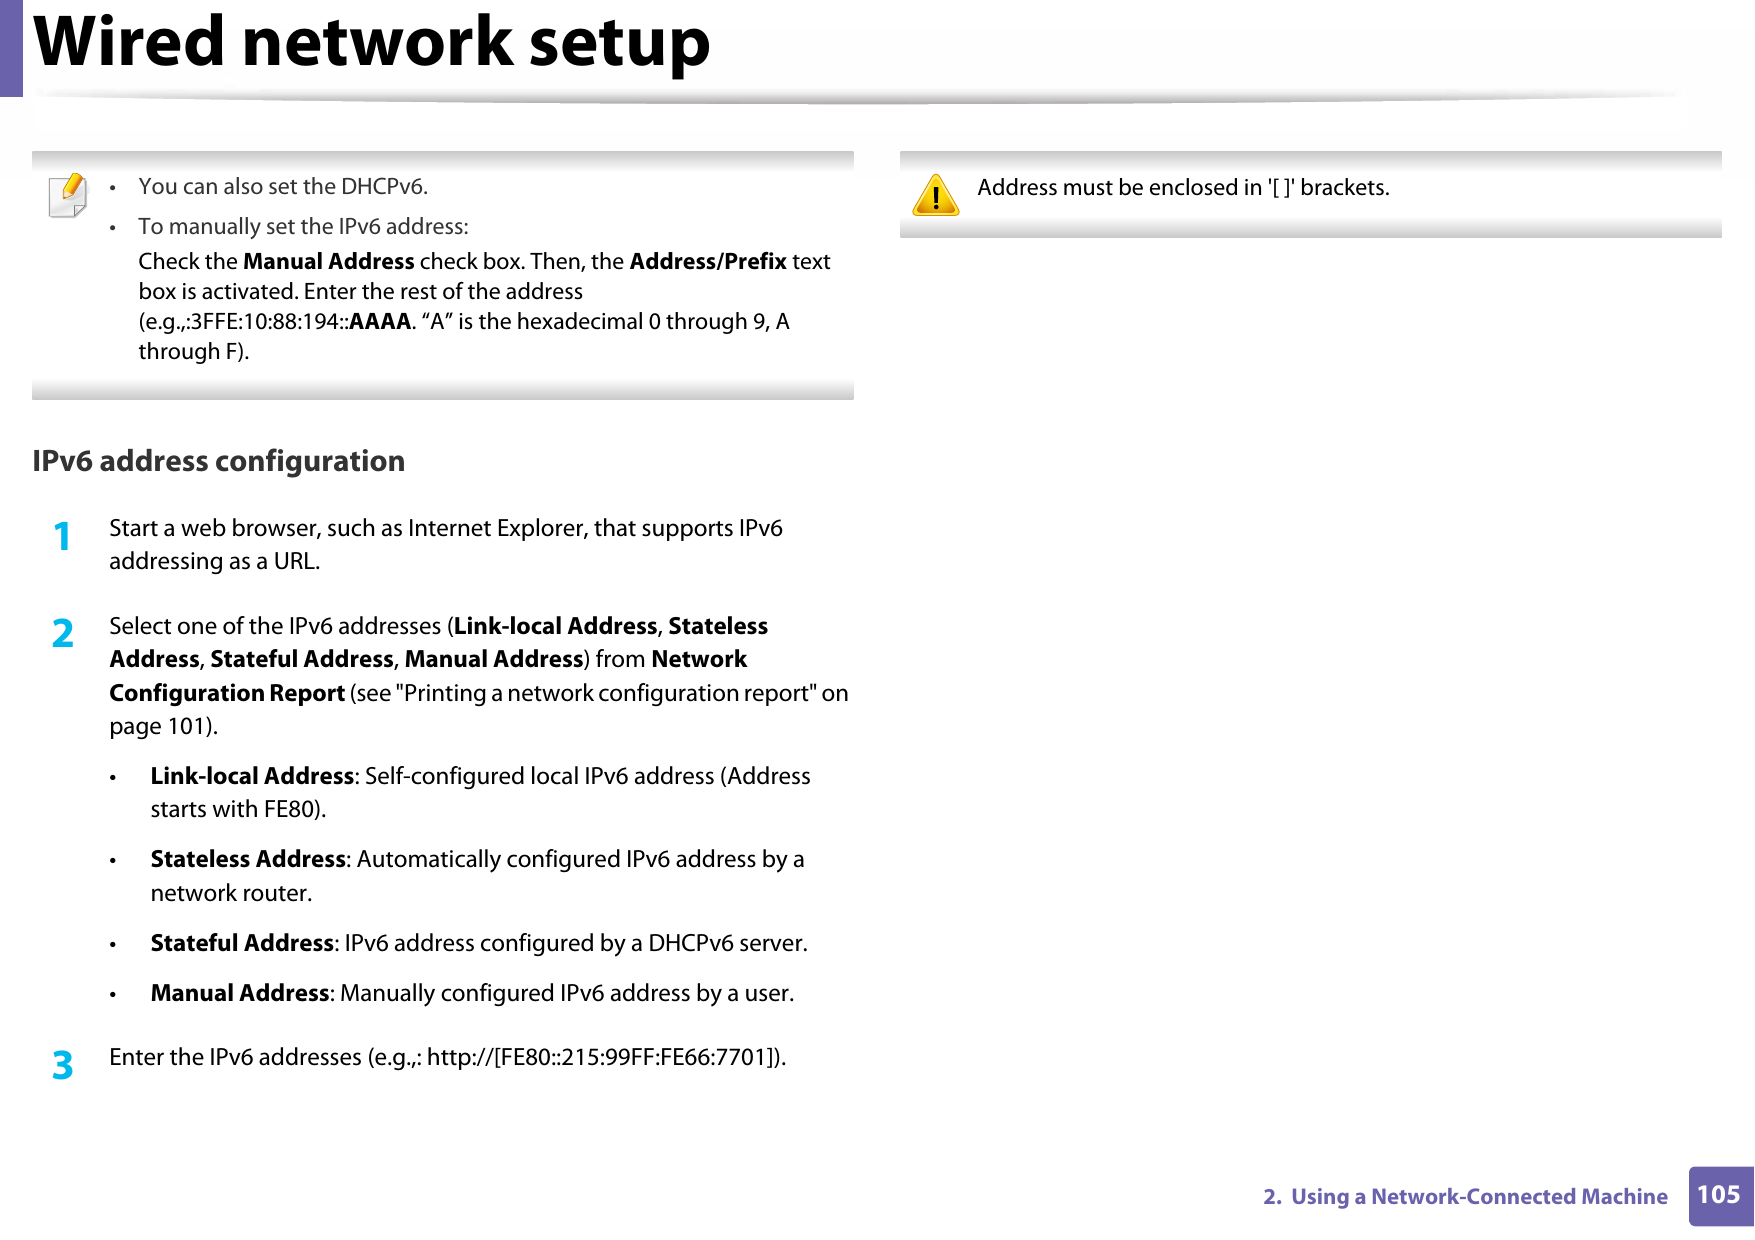 Wired network setup1052.  Using a Network-Connected Machine • You can also set the DHCPv6.• To manually set the IPv6 address:Check the Manual Address check box. Then, the Address/Prefix text box is activated. Enter the rest of the address (e.g.,:3FFE:10:88:194::AAAA. “A” is the hexadecimal 0 through 9, A through F). IPv6 address configuration1Start a web browser, such as Internet Explorer, that supports IPv6 addressing as a URL.2  Select one of the IPv6 addresses (Link-local Address, Stateless Address, Stateful Address, Manual Address) from Network Configuration Report (see &quot;Printing a network configuration report&quot; on page 101).•Link-local Address: Self-configured local IPv6 address (Address starts with FE80).•Stateless Address: Automatically configured IPv6 address by a network router.•Stateful Address: IPv6 address configured by a DHCPv6 server.•Manual Address: Manually configured IPv6 address by a user.3  Enter the IPv6 addresses (e.g.,: http://[FE80::215:99FF:FE66:7701]). Address must be enclosed in &apos;[ ]&apos; brackets. 